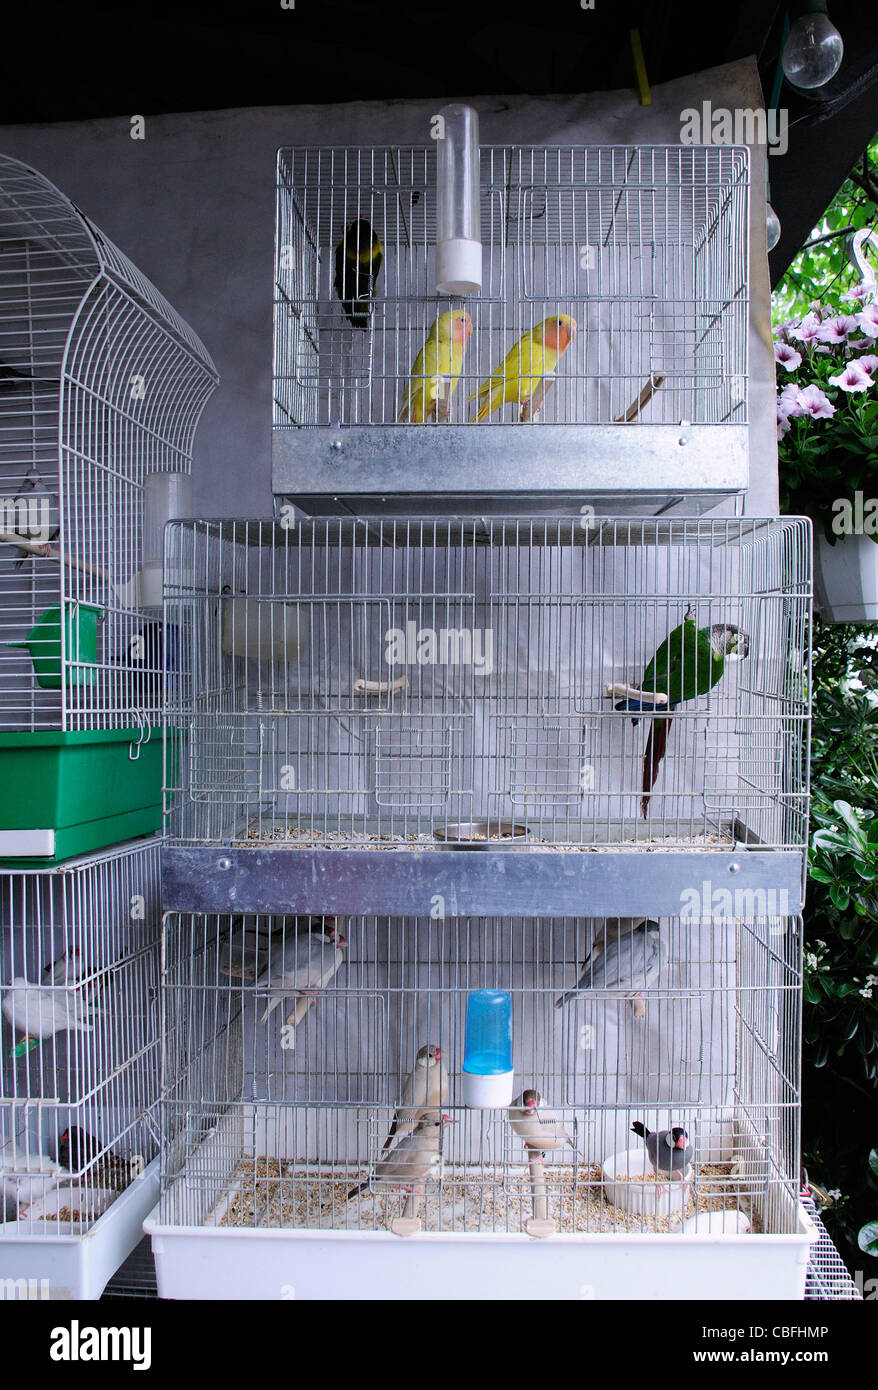 Small birds in cages stacked for sale in Paris Market Stock Photo